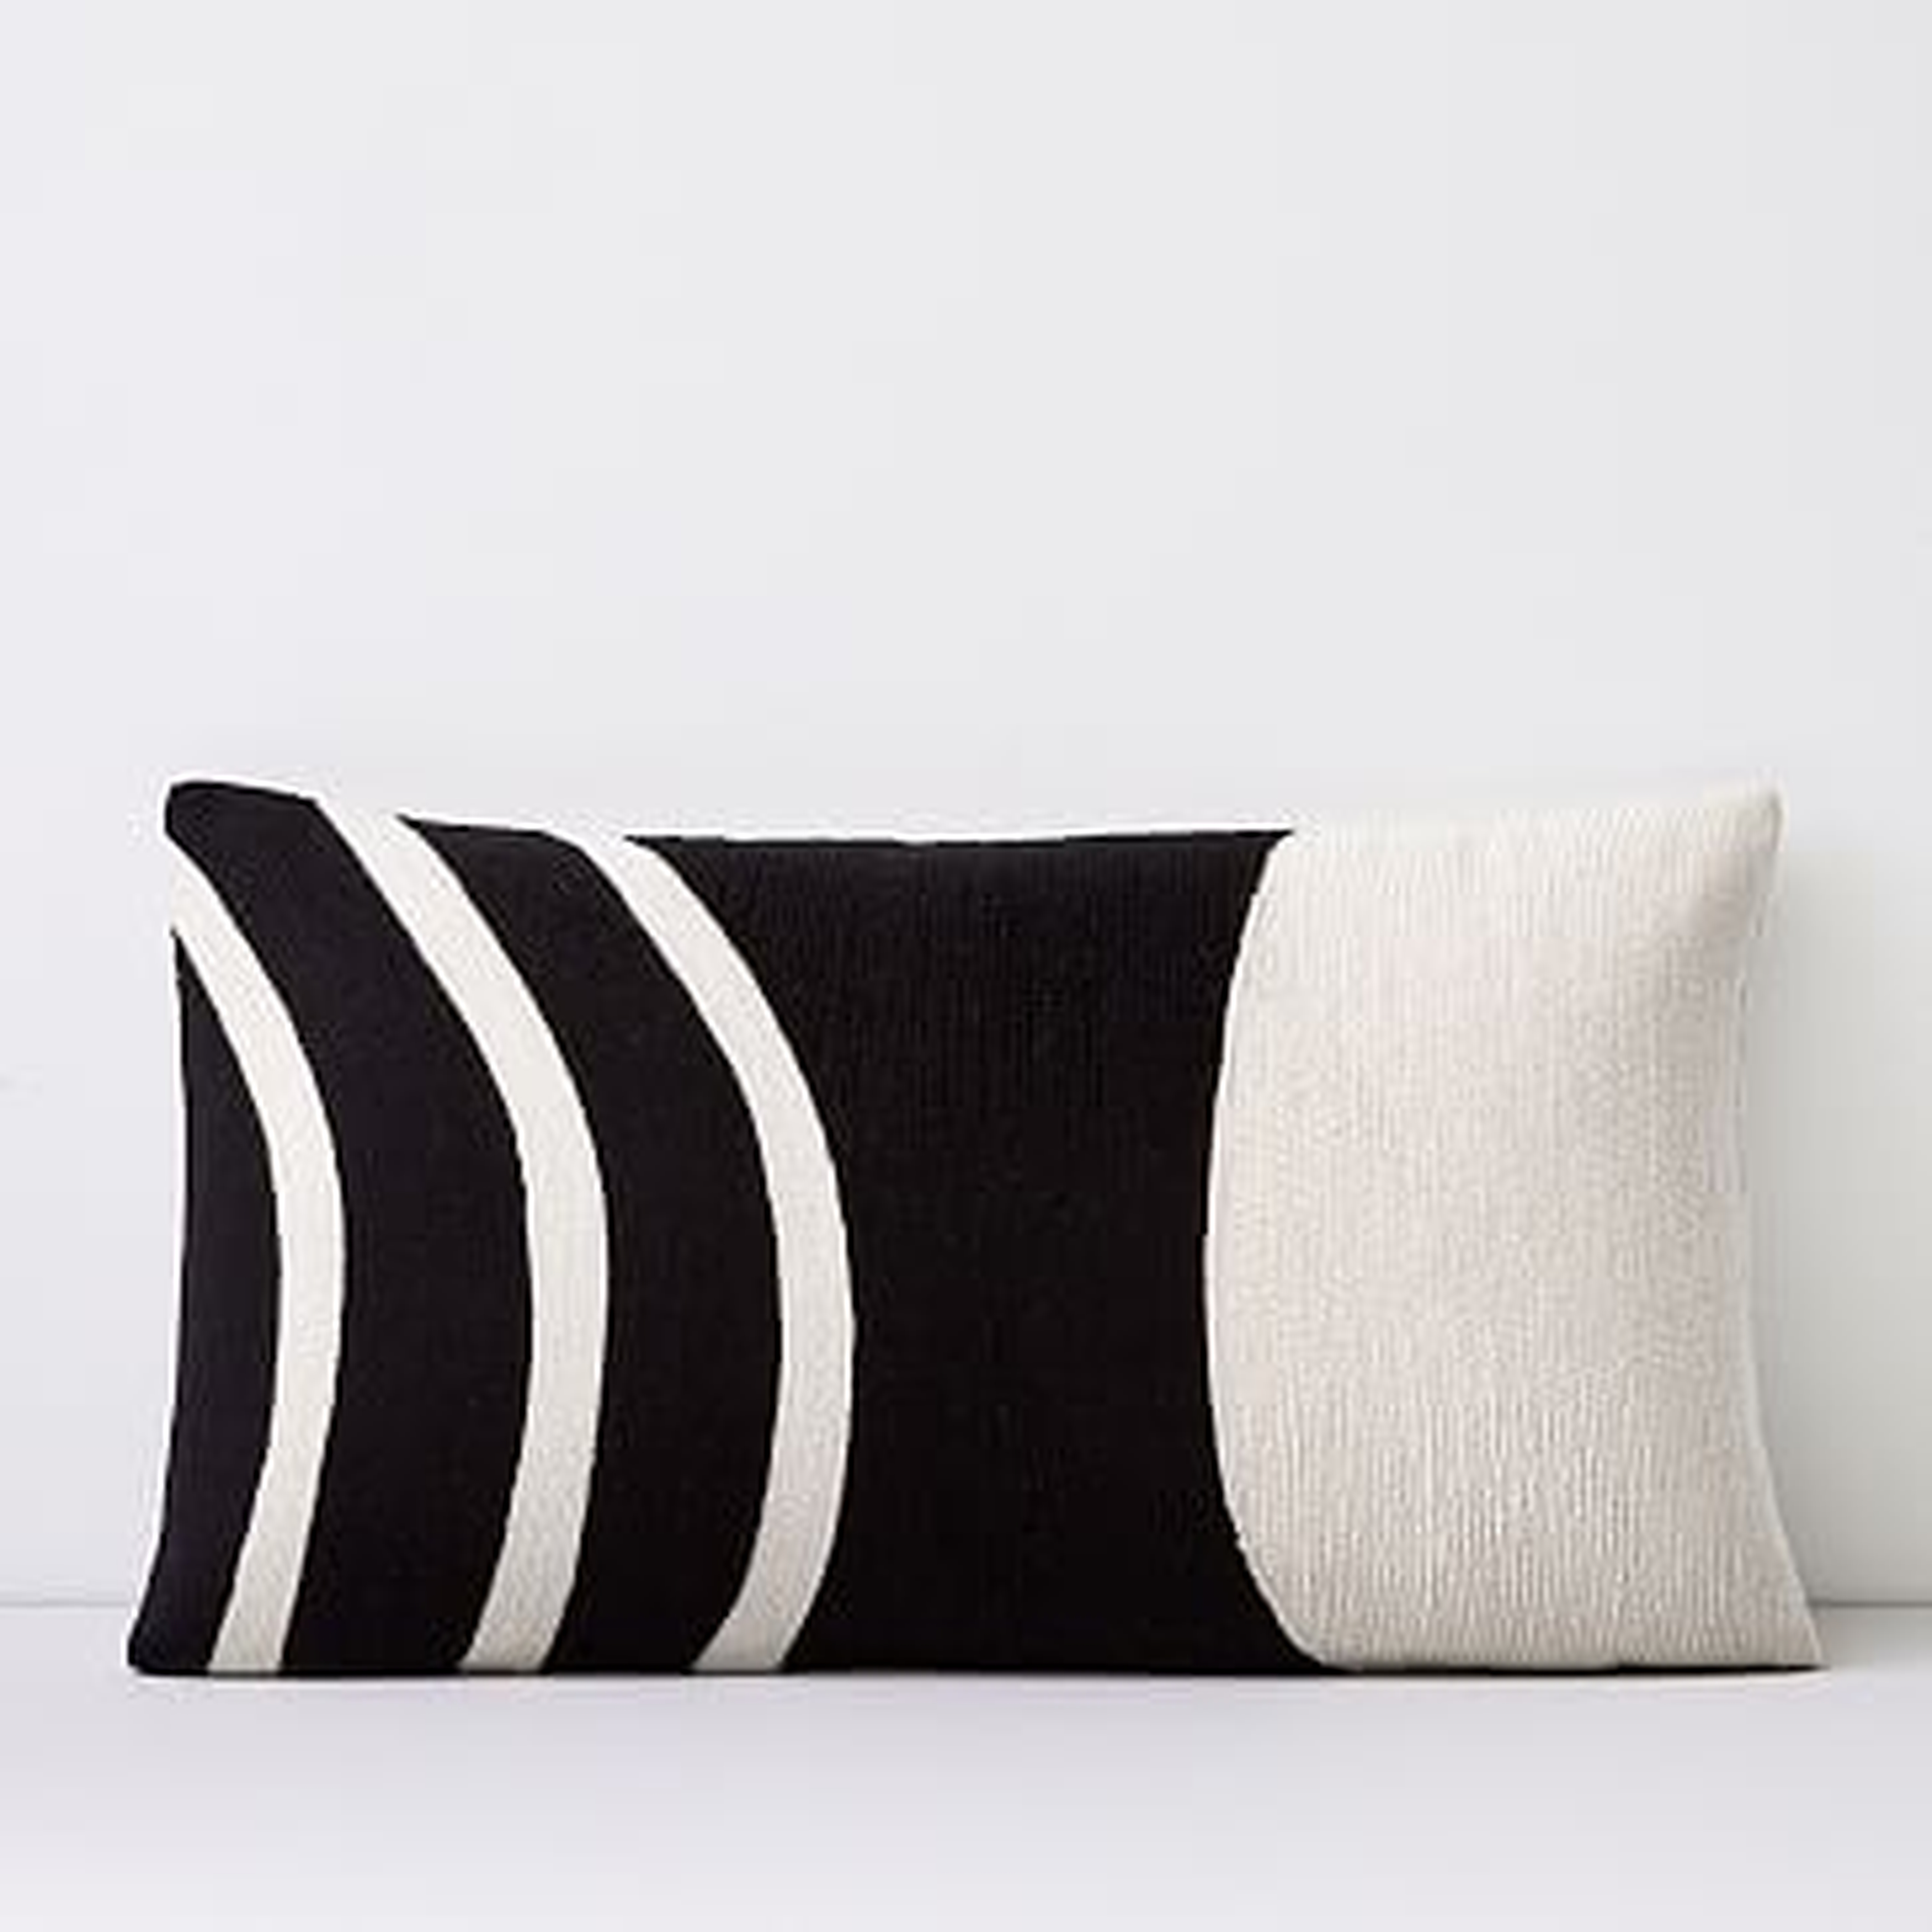 Crewel Rounded Pillow Cover, Black, 12"x21" - West Elm